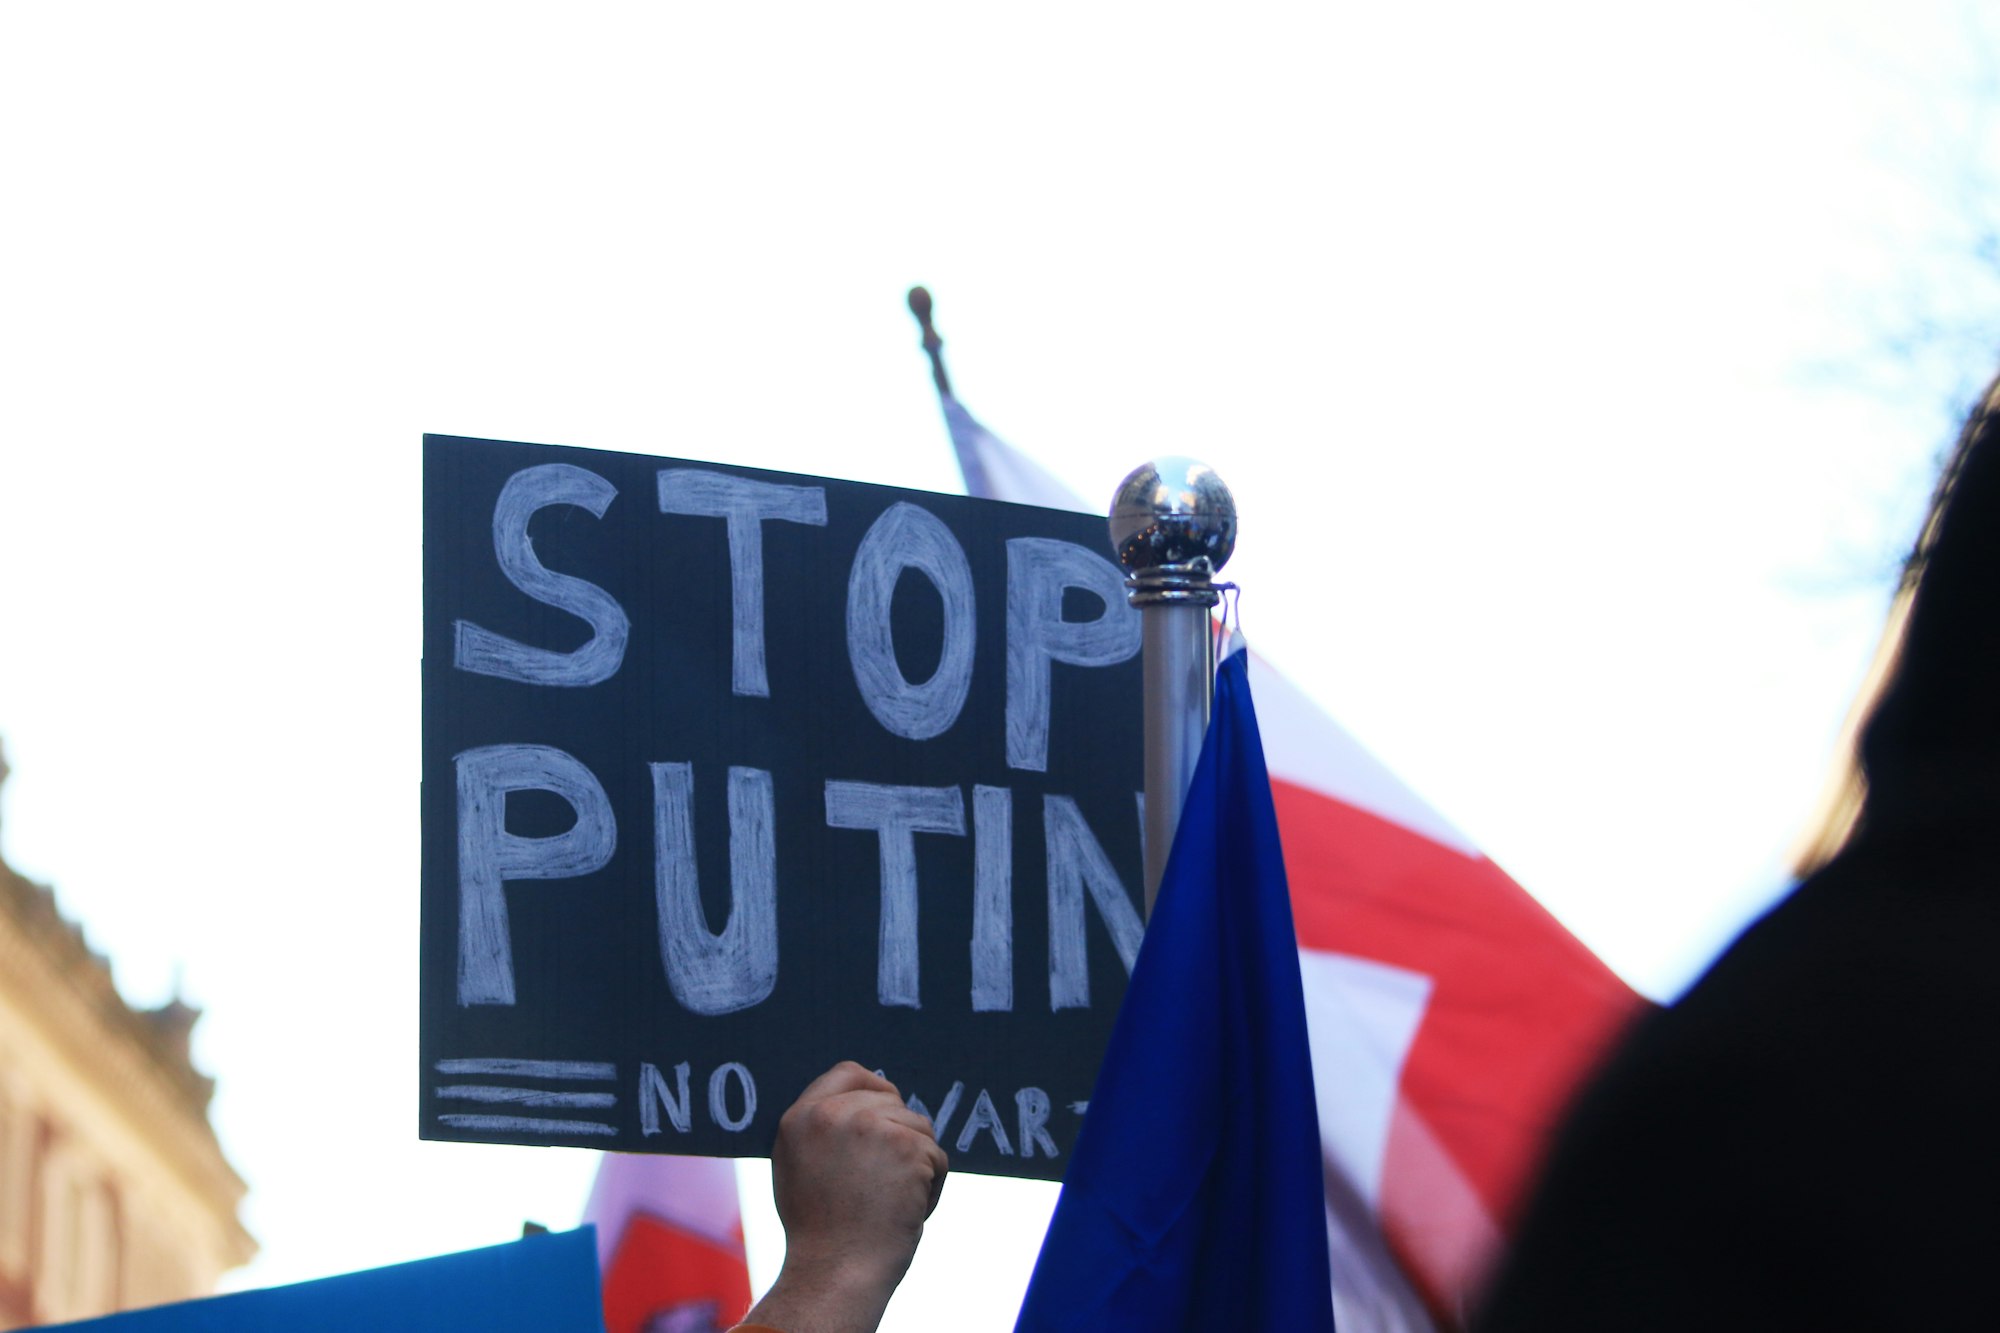 Putin's quagmire in Europe: a realistic negotiated proposal for peace.